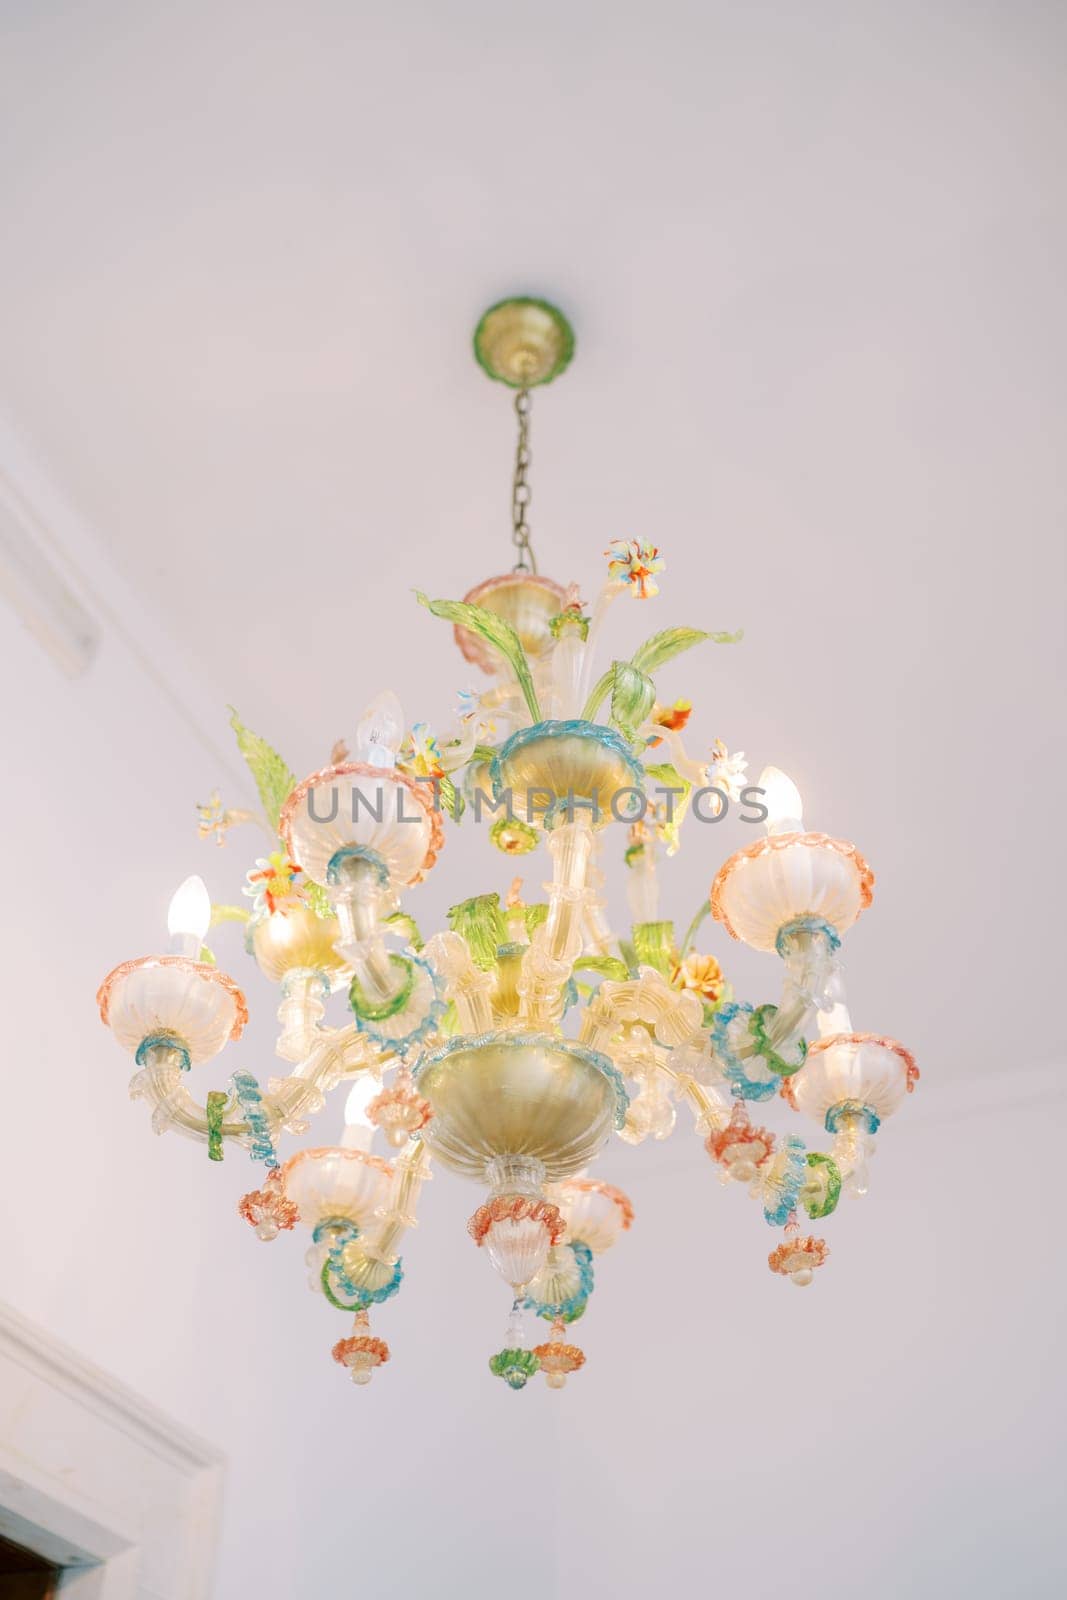 Colorful chandelier with floral decoration hanging on the ceiling of the room by Nadtochiy